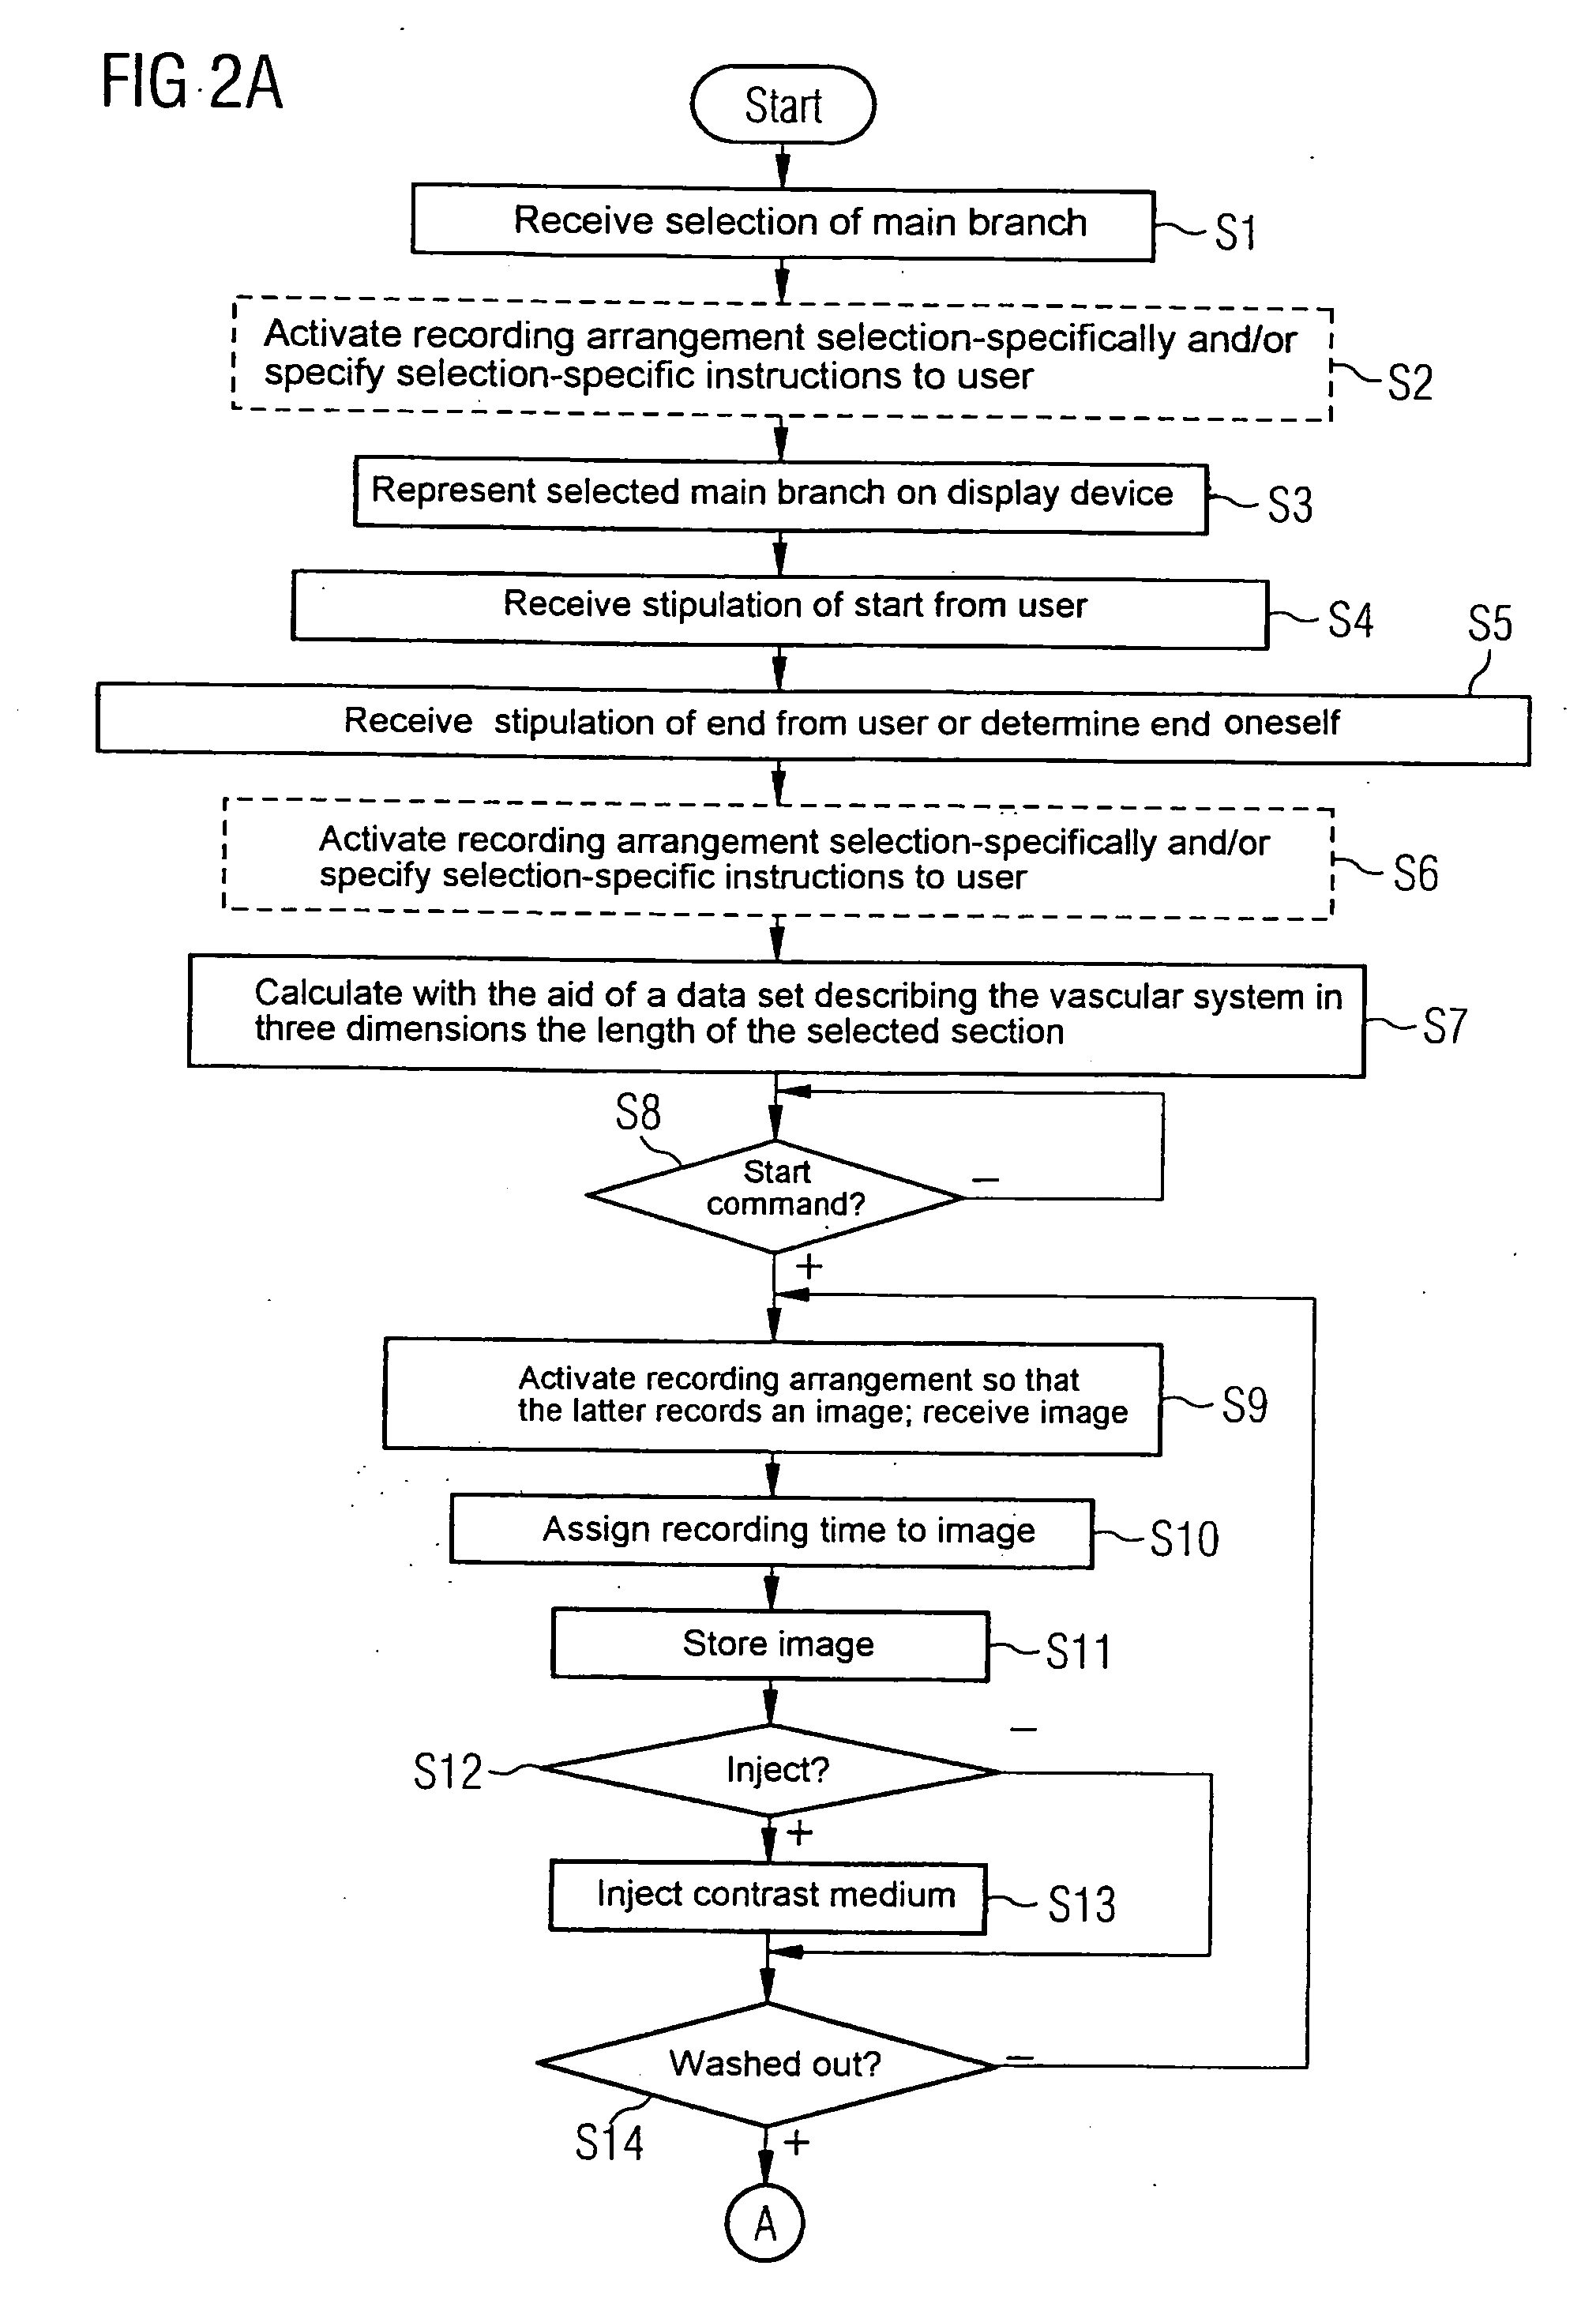 Operating method for a computer, operating method for a medical imaging system and items corresponding thereto